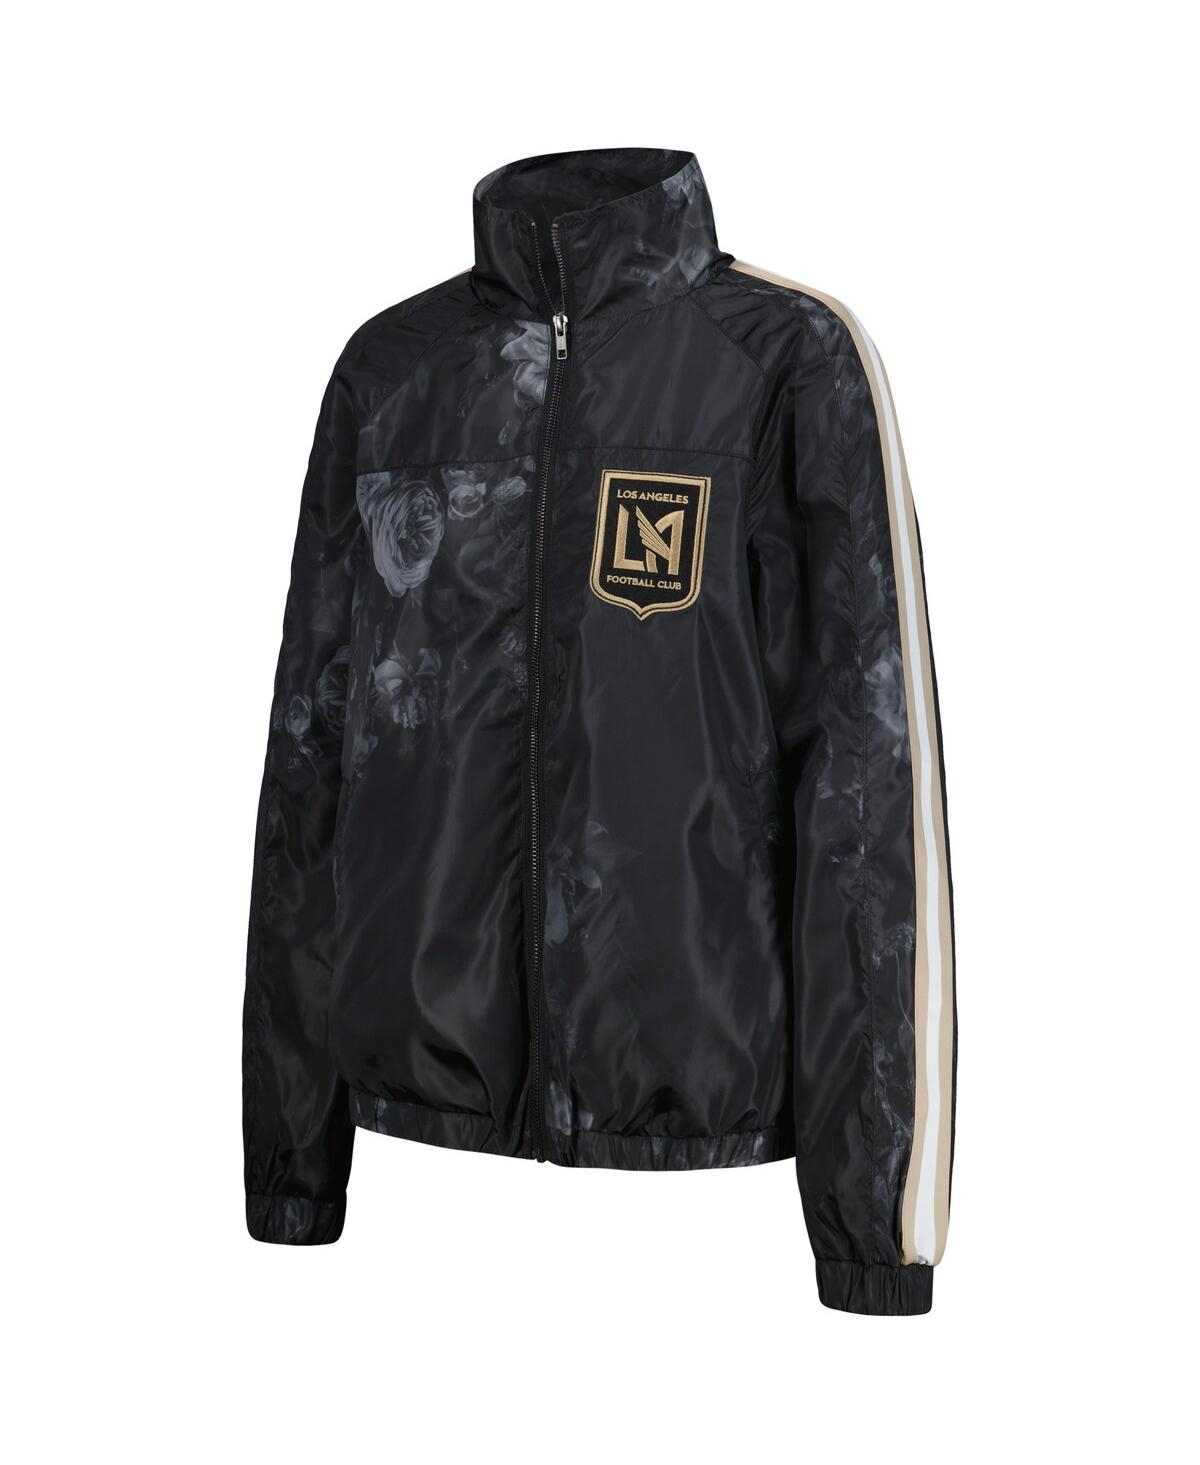 Shop The Wild Collective Women's  Black Lafc Full-zip Track Jacket